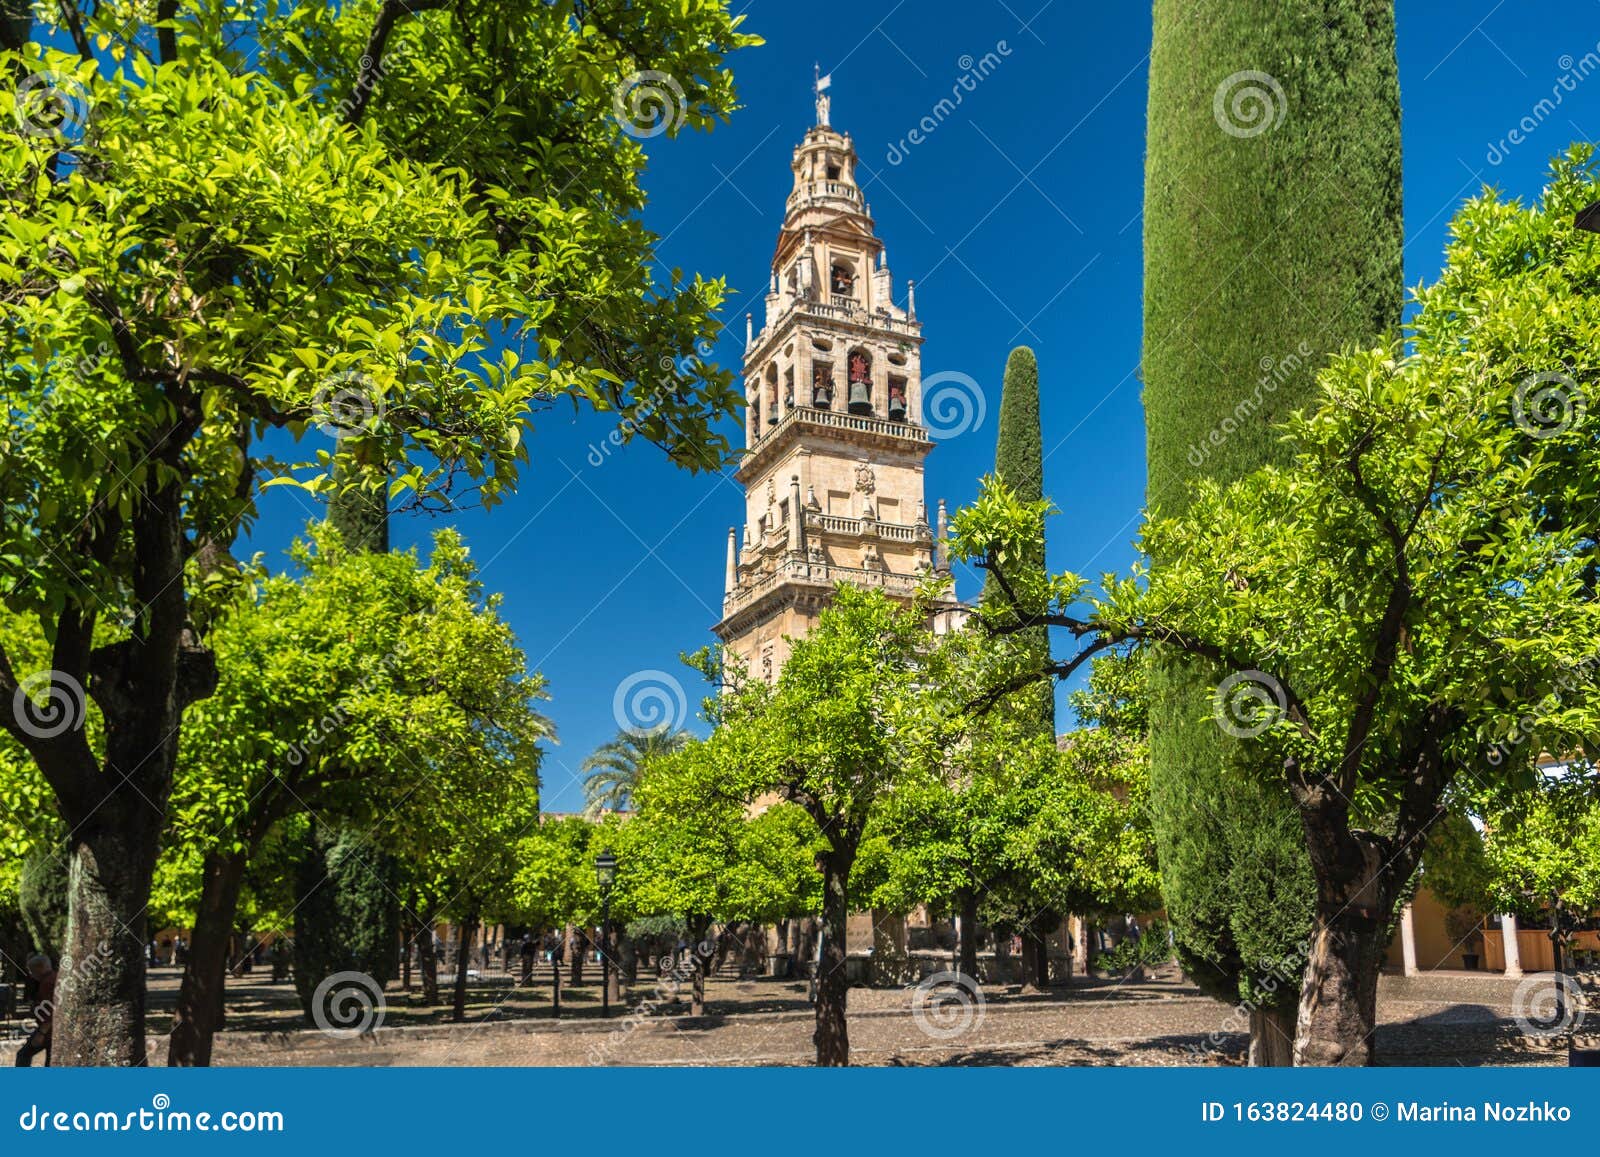 View of the Bell Tower of the from the Orange Courtyard Patio De Los Naranjos in Cordoba, Spain Stock Photo - Image of garden, andalucia: 163824480